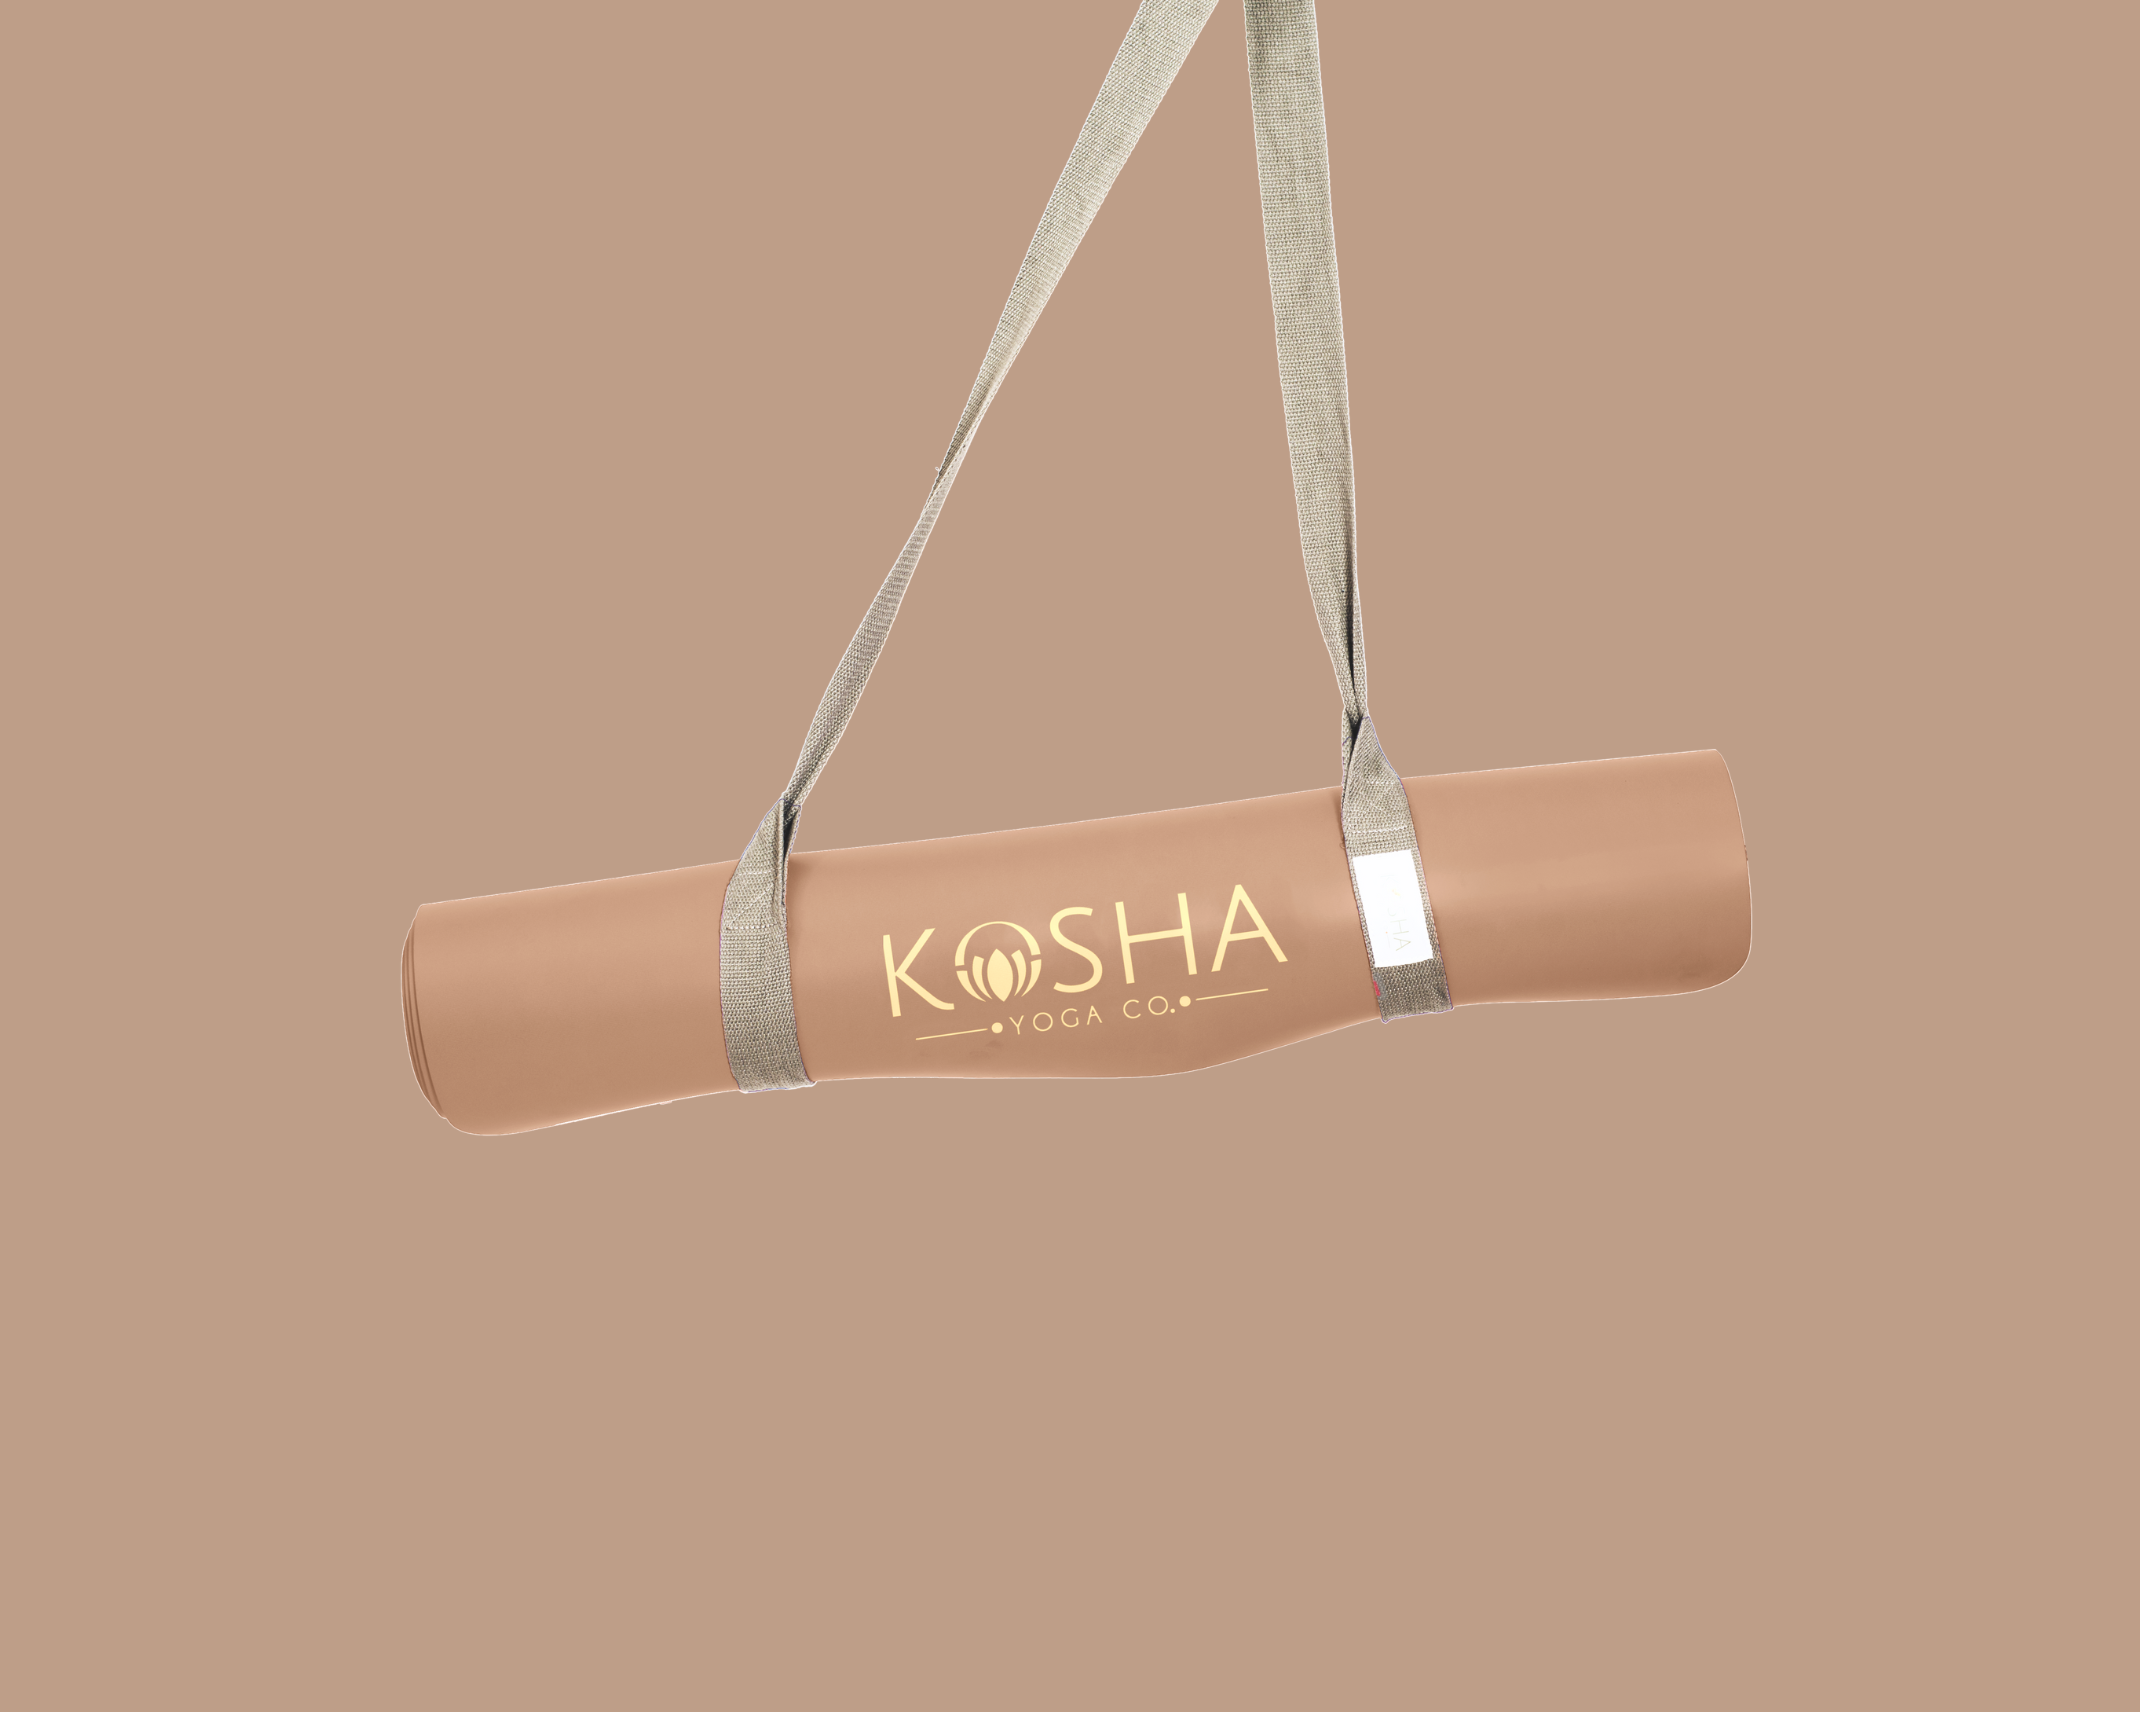 sustainable yoga mat with rubber base that is non slip and sweat absorbent by kosha yoga co